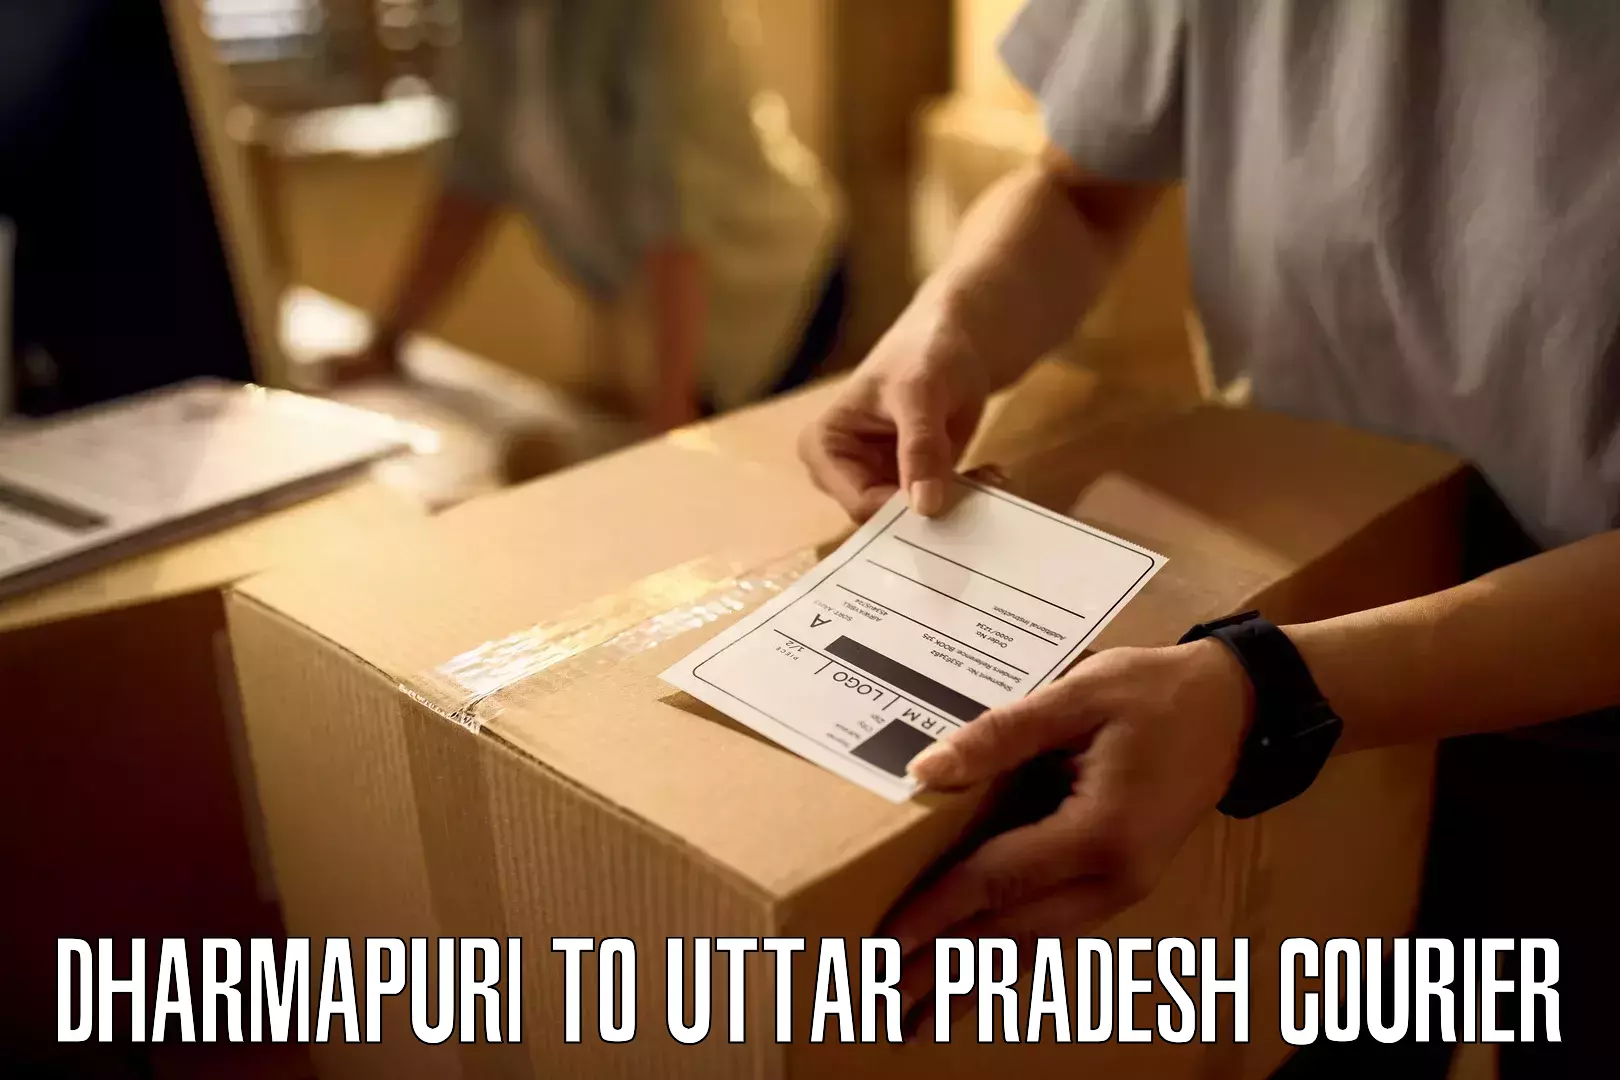 Expedited shipping methods in Dharmapuri to Kanpur